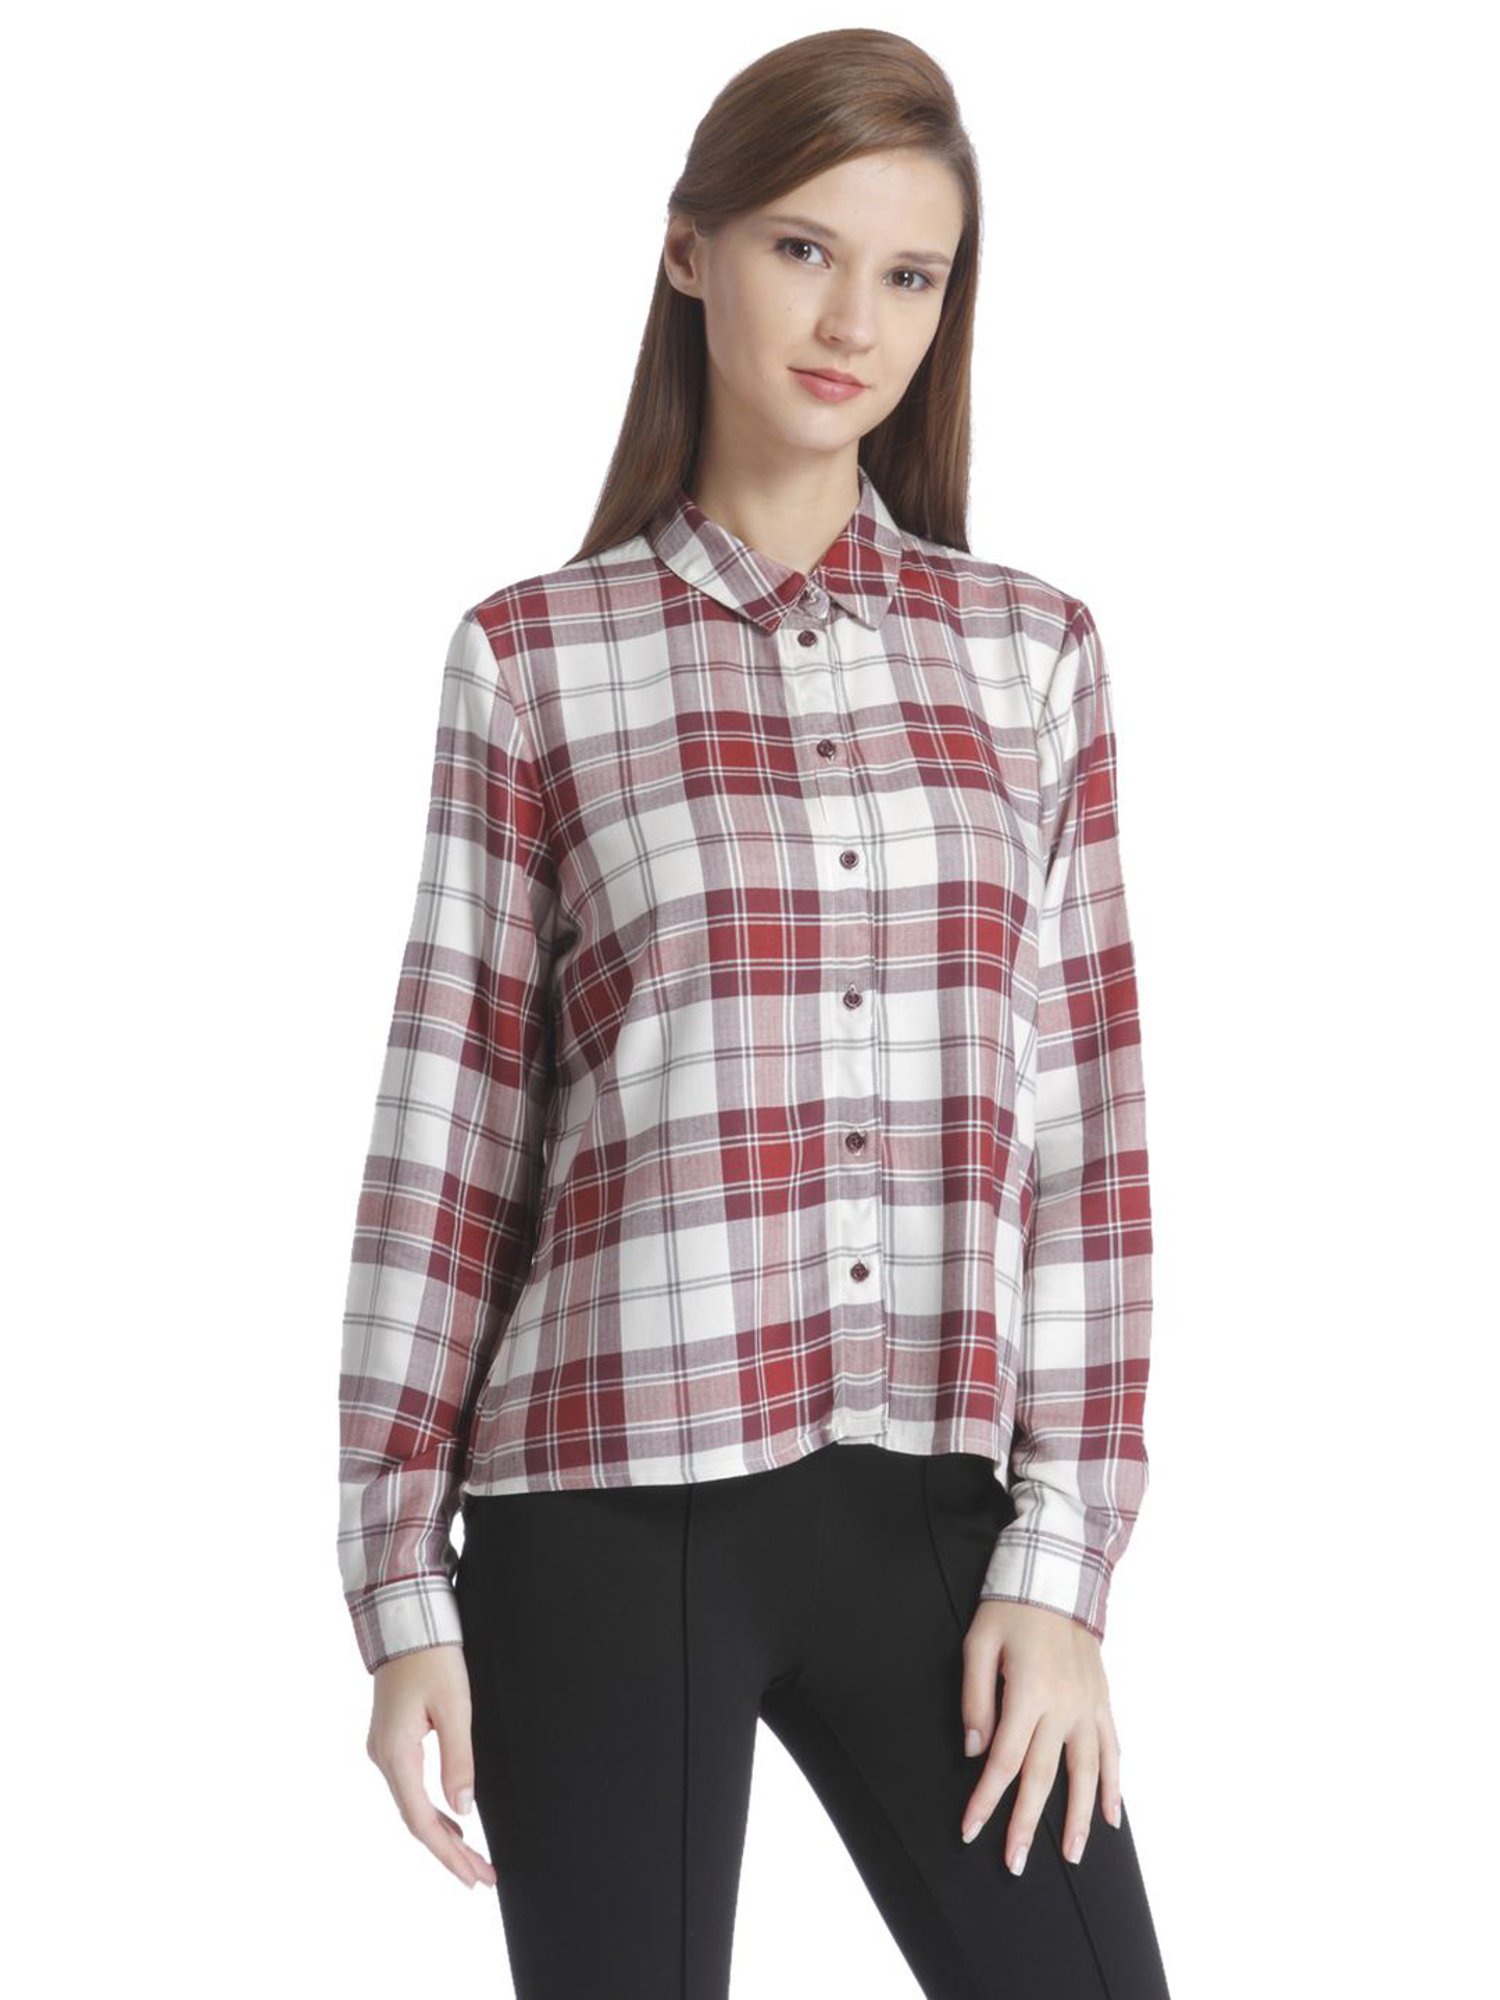 Buy Only White & Red Plaid Pattern Shirt for Women Online @ Tata CLiQ